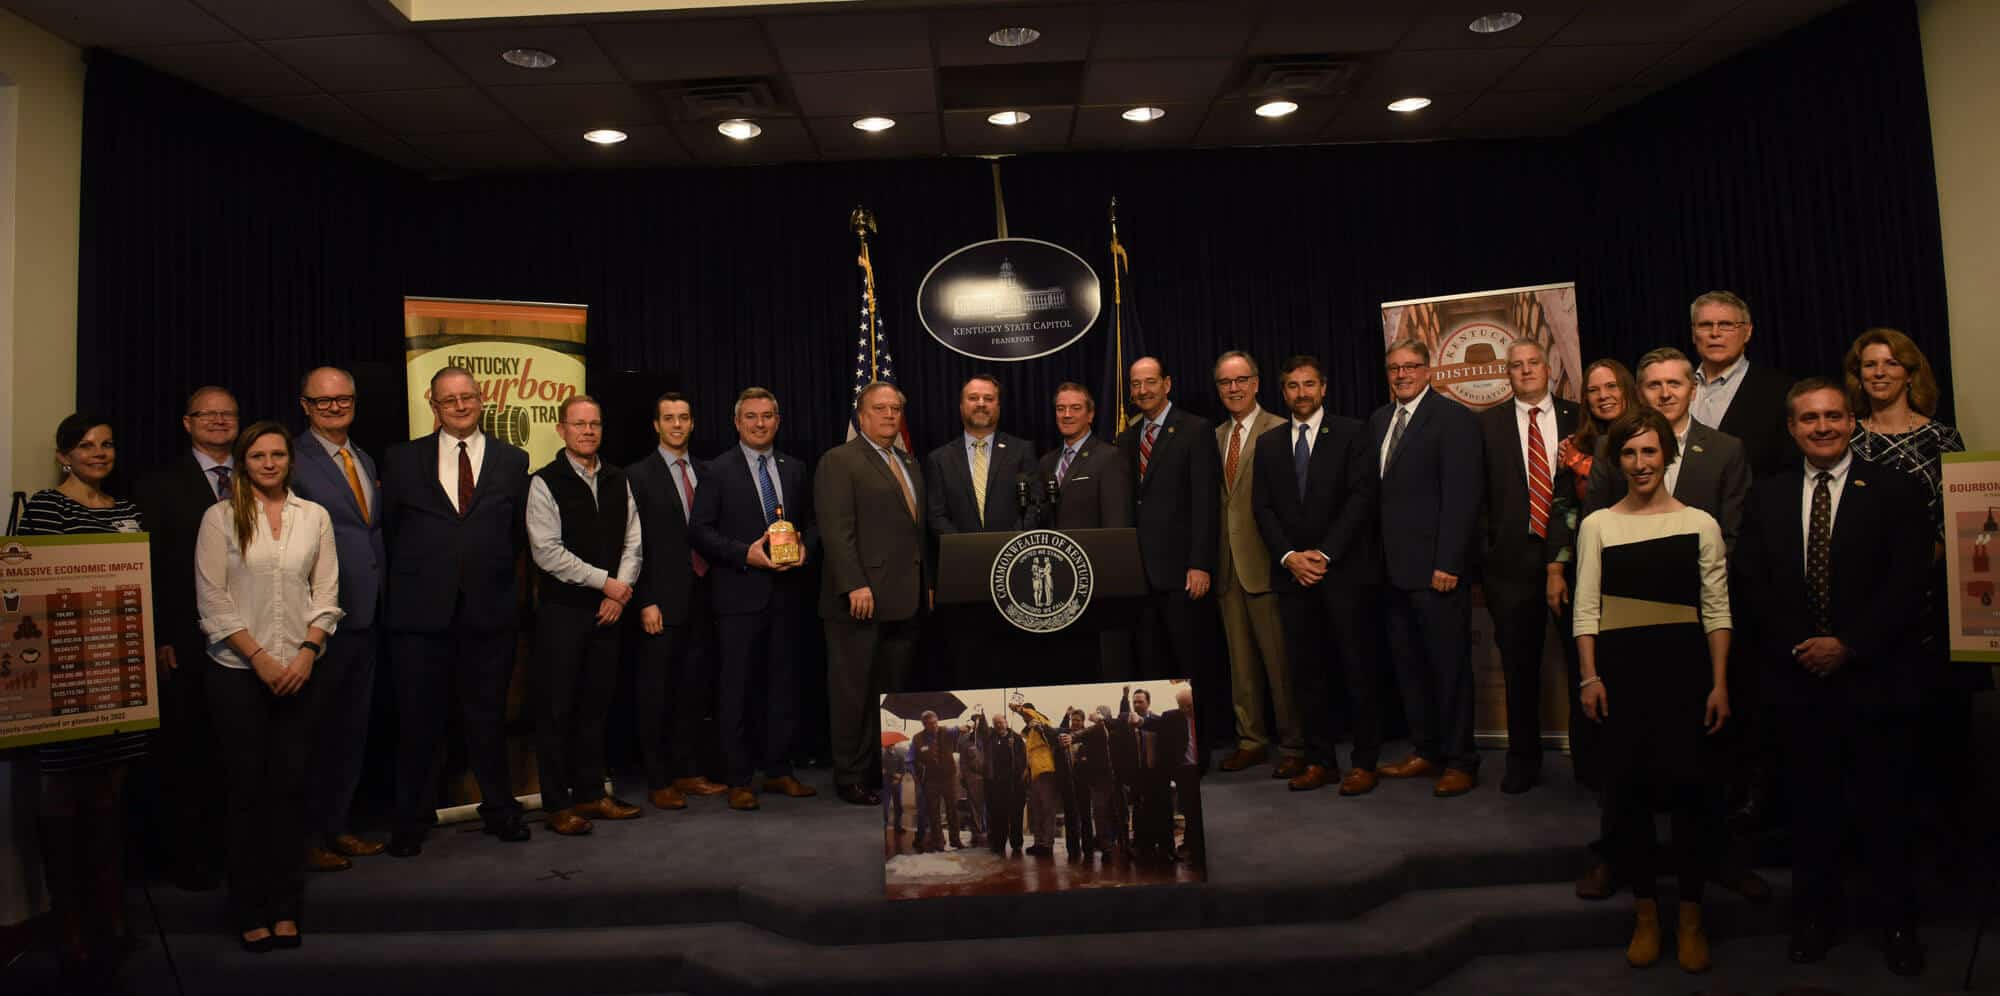 Ec Impact Presser Group 2019 - Make It A Double: New Study Shows Bourbon Industry Has Doubled Economic Impact In 10 Years